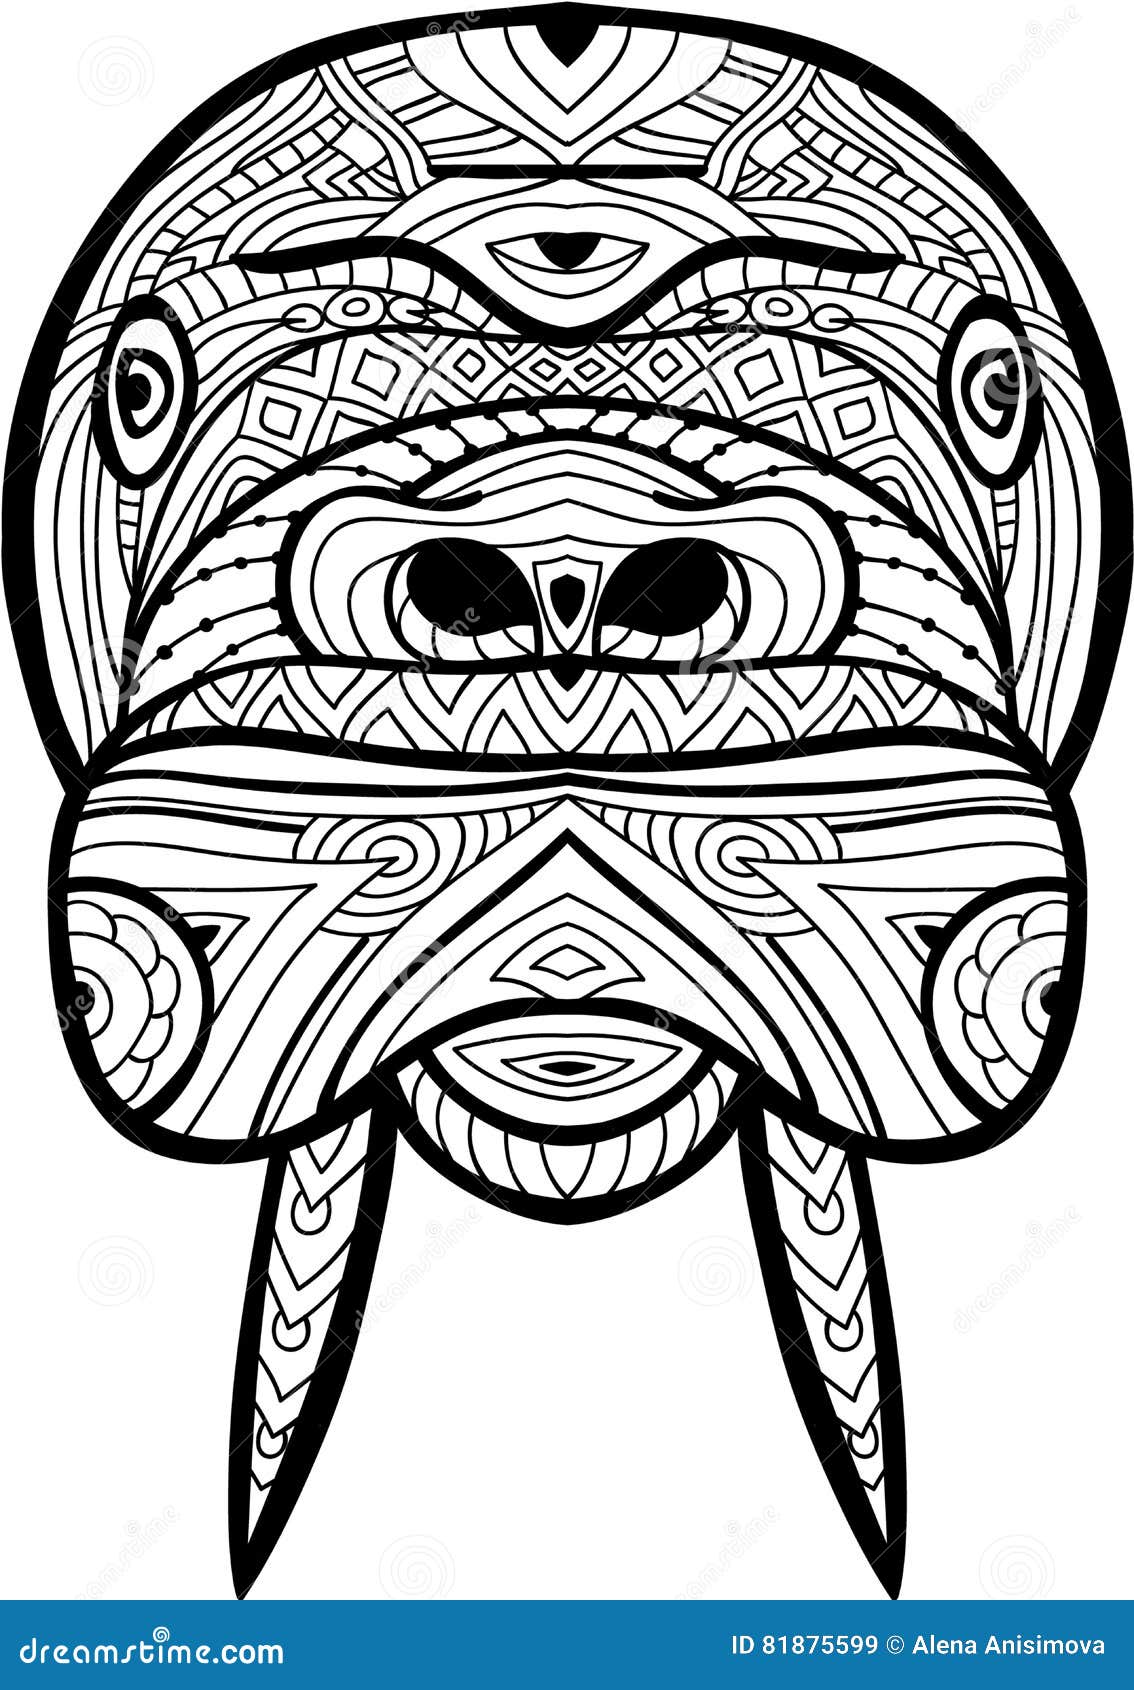 Download Coloring Antistress Page. Ferocious Walrus Is Drawn By Hand With Stock Vector - Illustration of ...